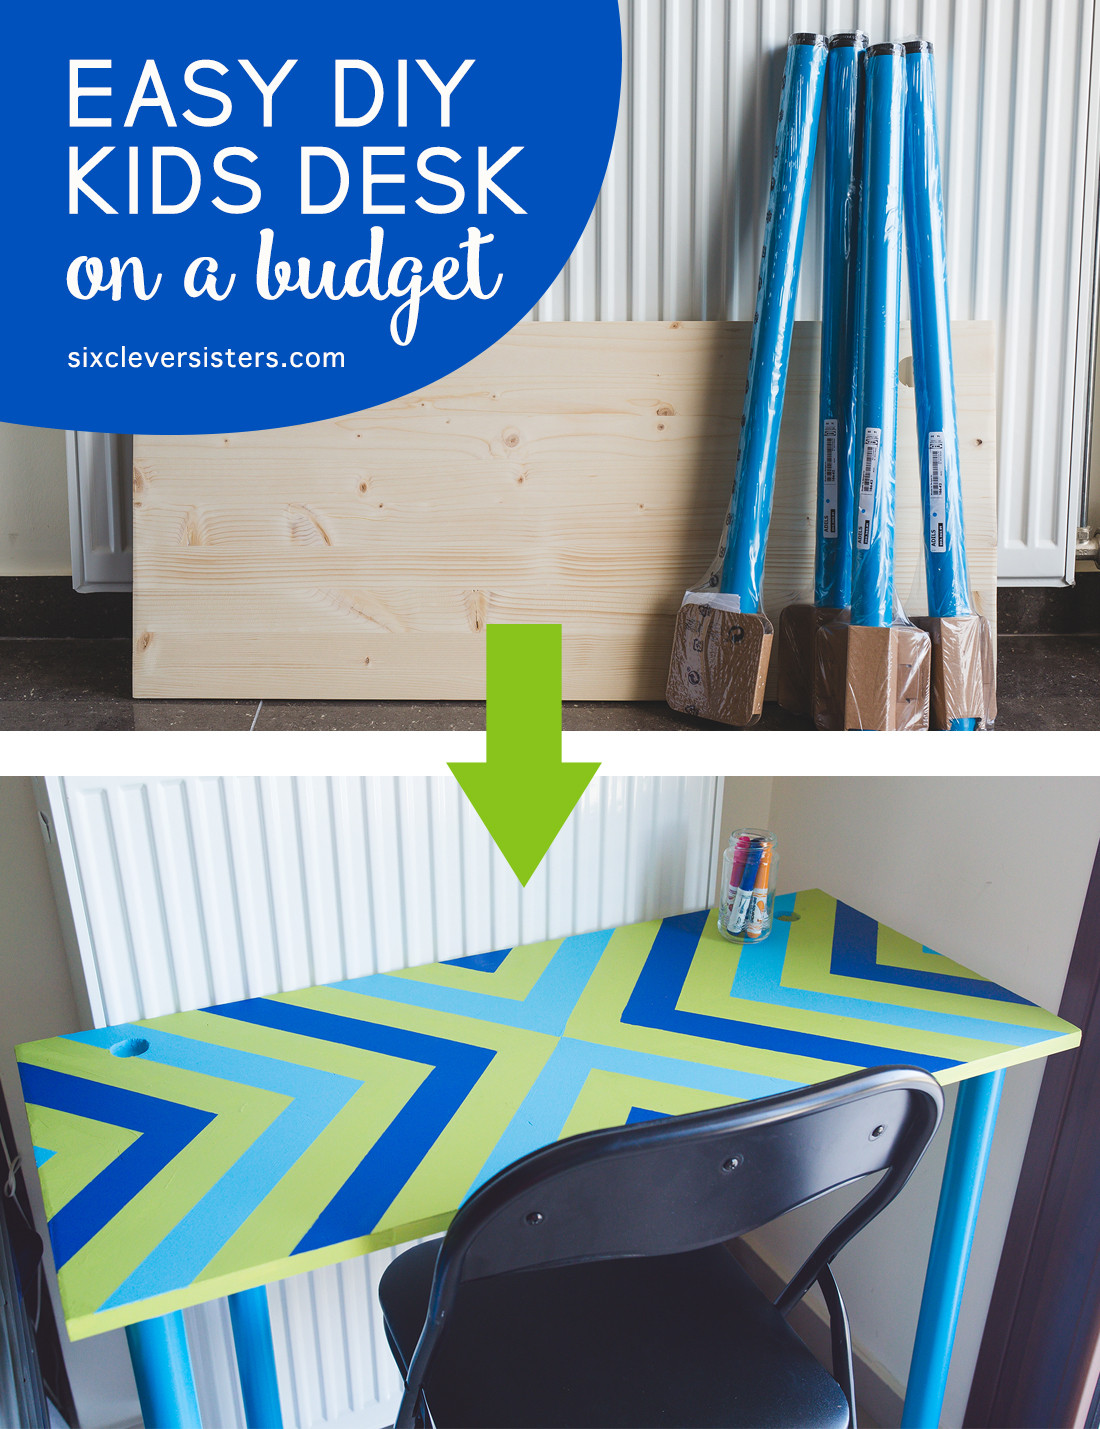 How To Ideas For Kids
 Easy DIY Kids Desk on a bud  Six Clever Sisters